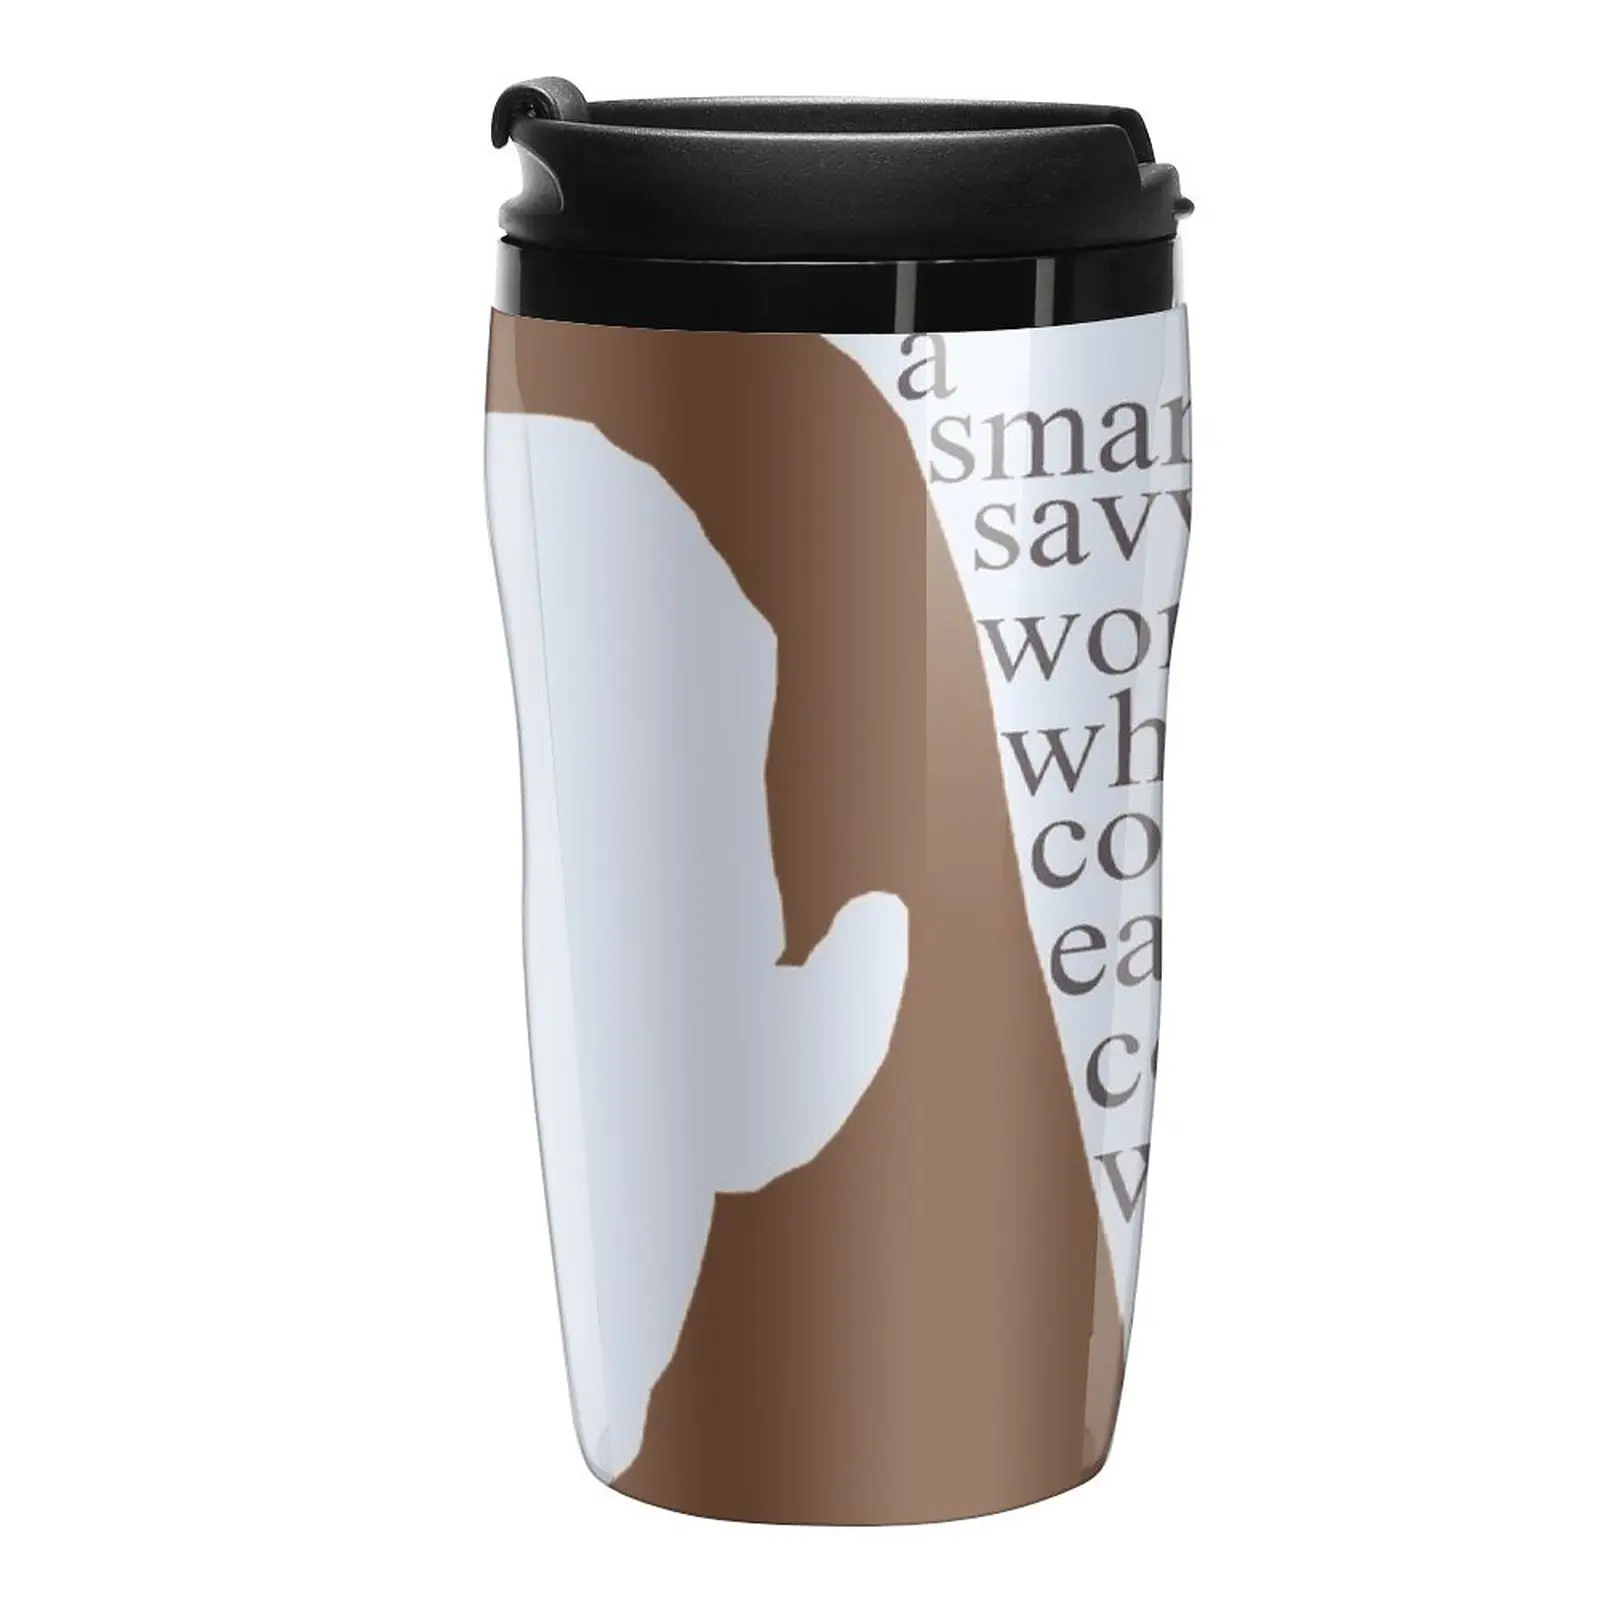 

C.J. Cregg quote | You're a smart savy woman who could easily consider world domination for a next career move Travel Coffee Mug